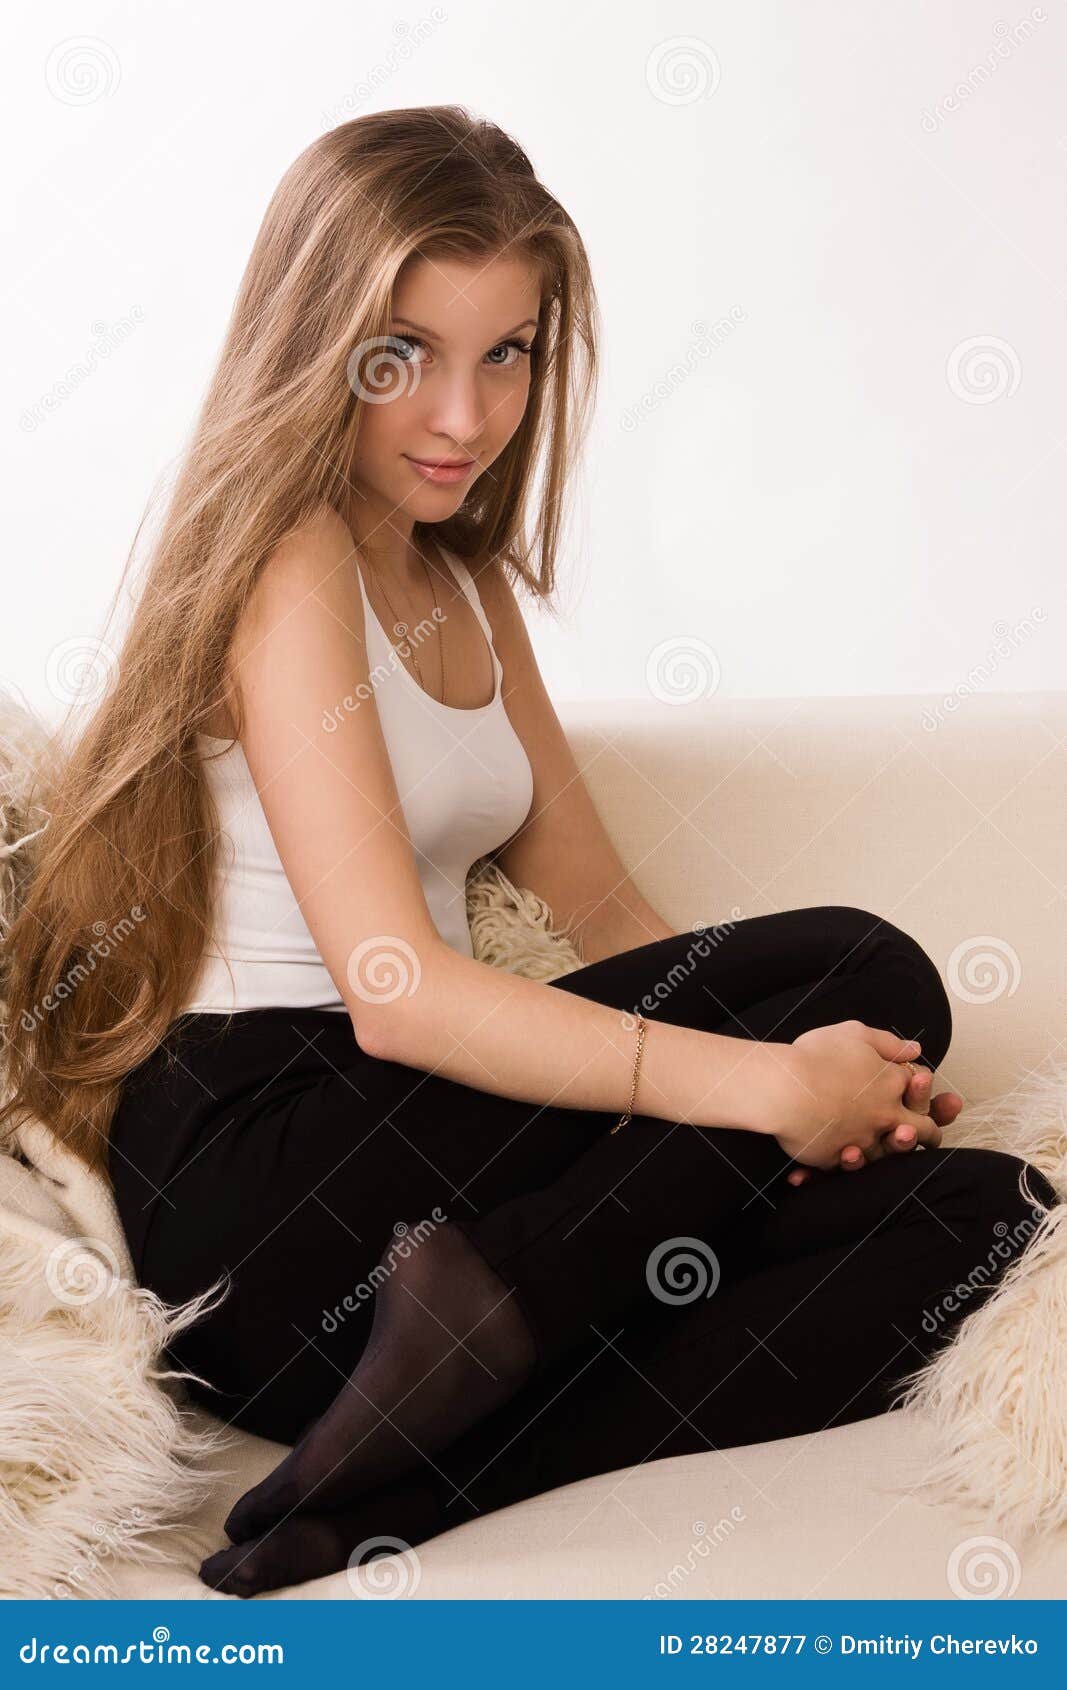 Attractive Girl Sitting On A Sofa Stock Image - Image of ...